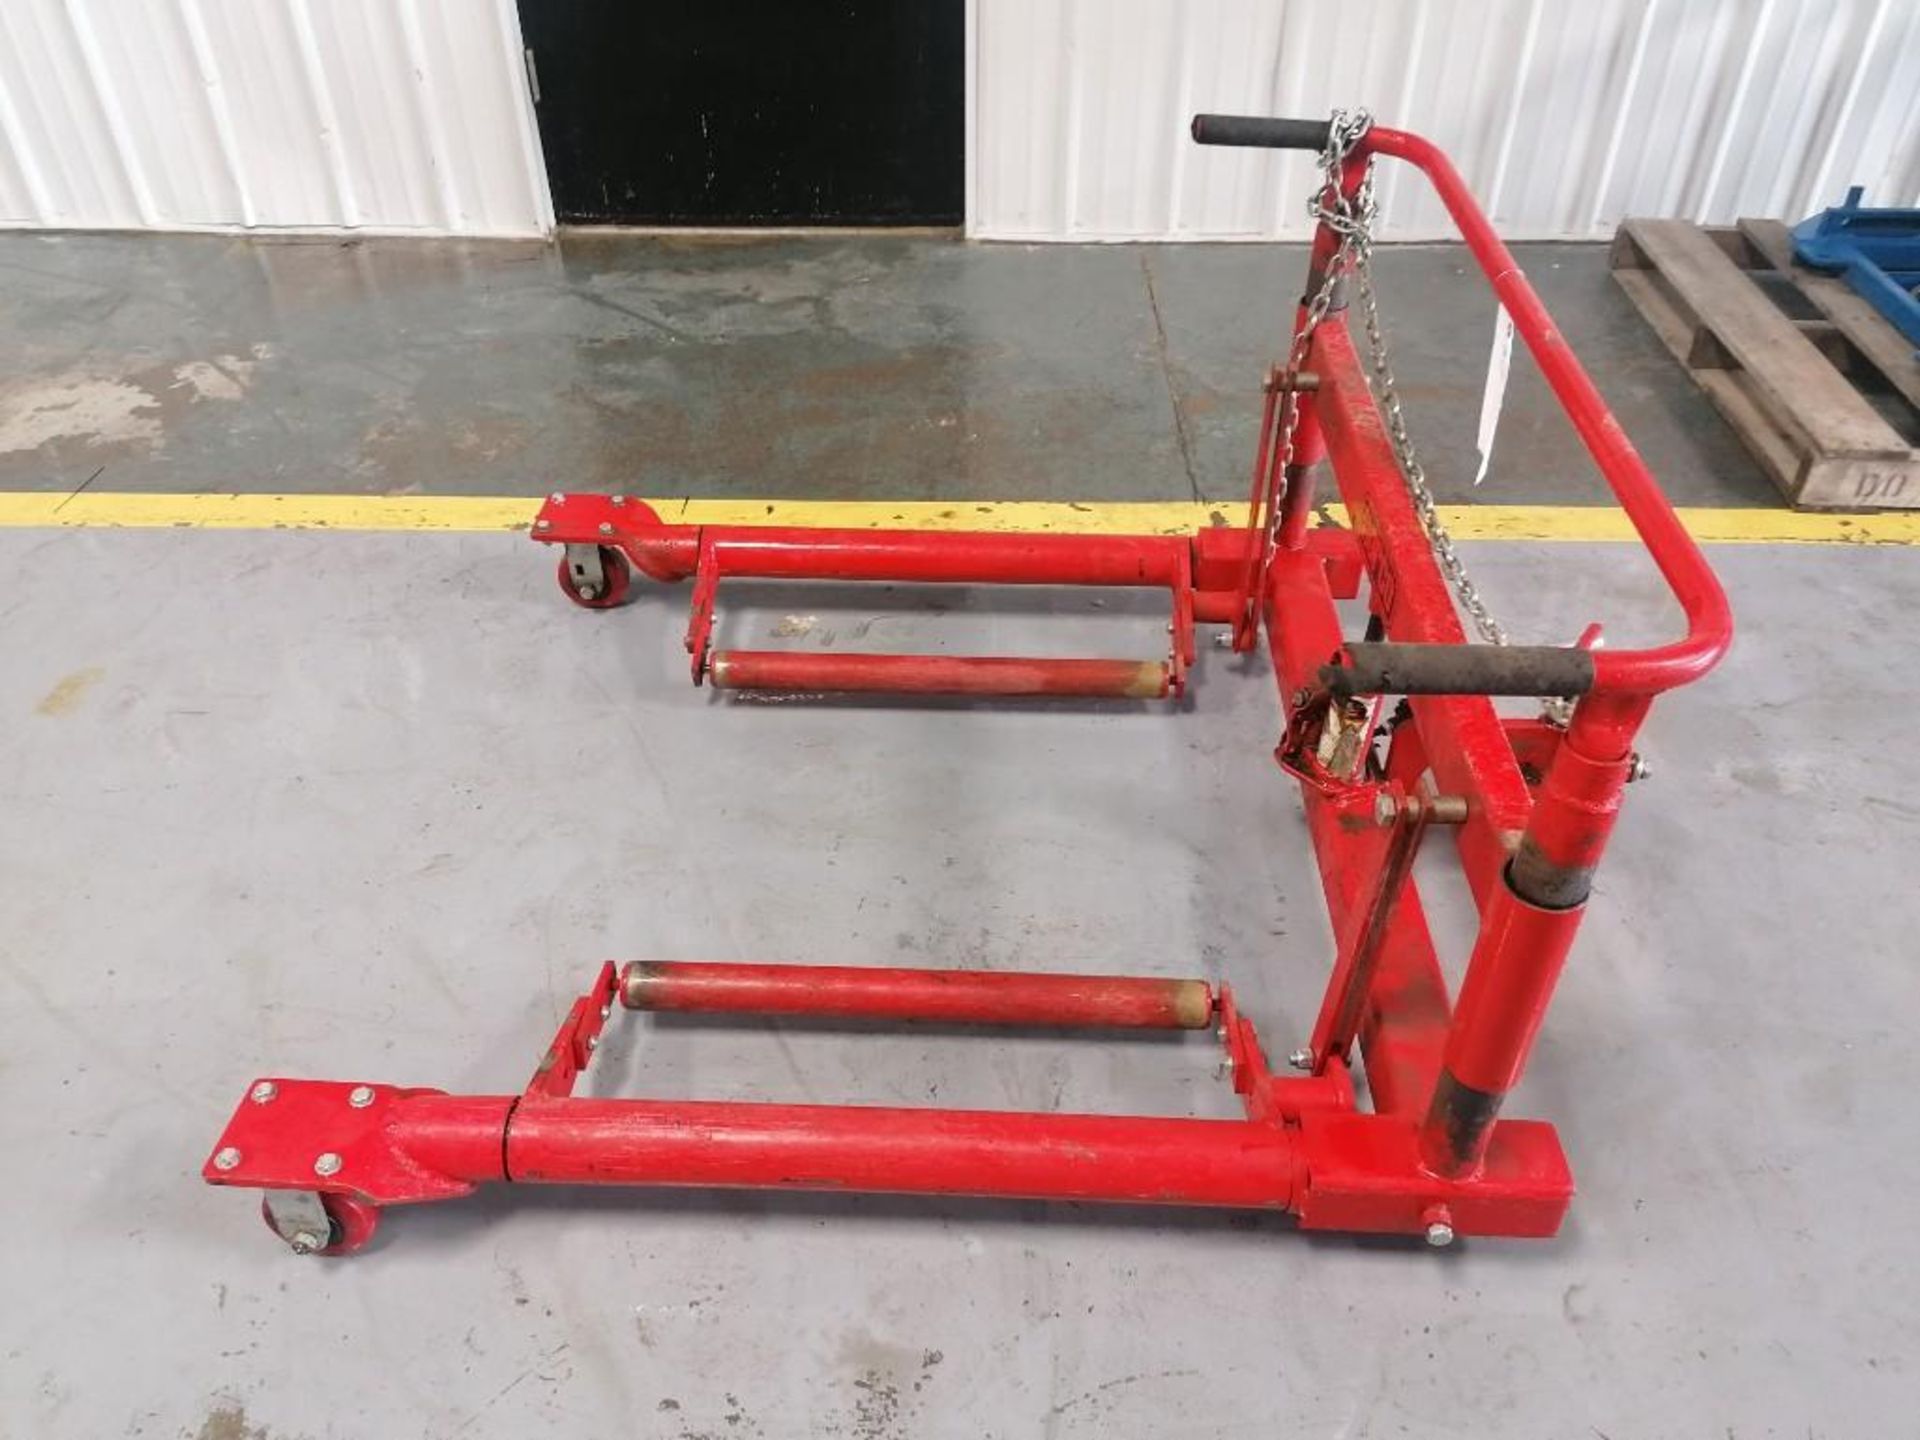 (1) NORCO 1 TON Capacity Wheel Dolly, Model 82300D. Located at 301 E Henry Street, Mt. Pleasant,